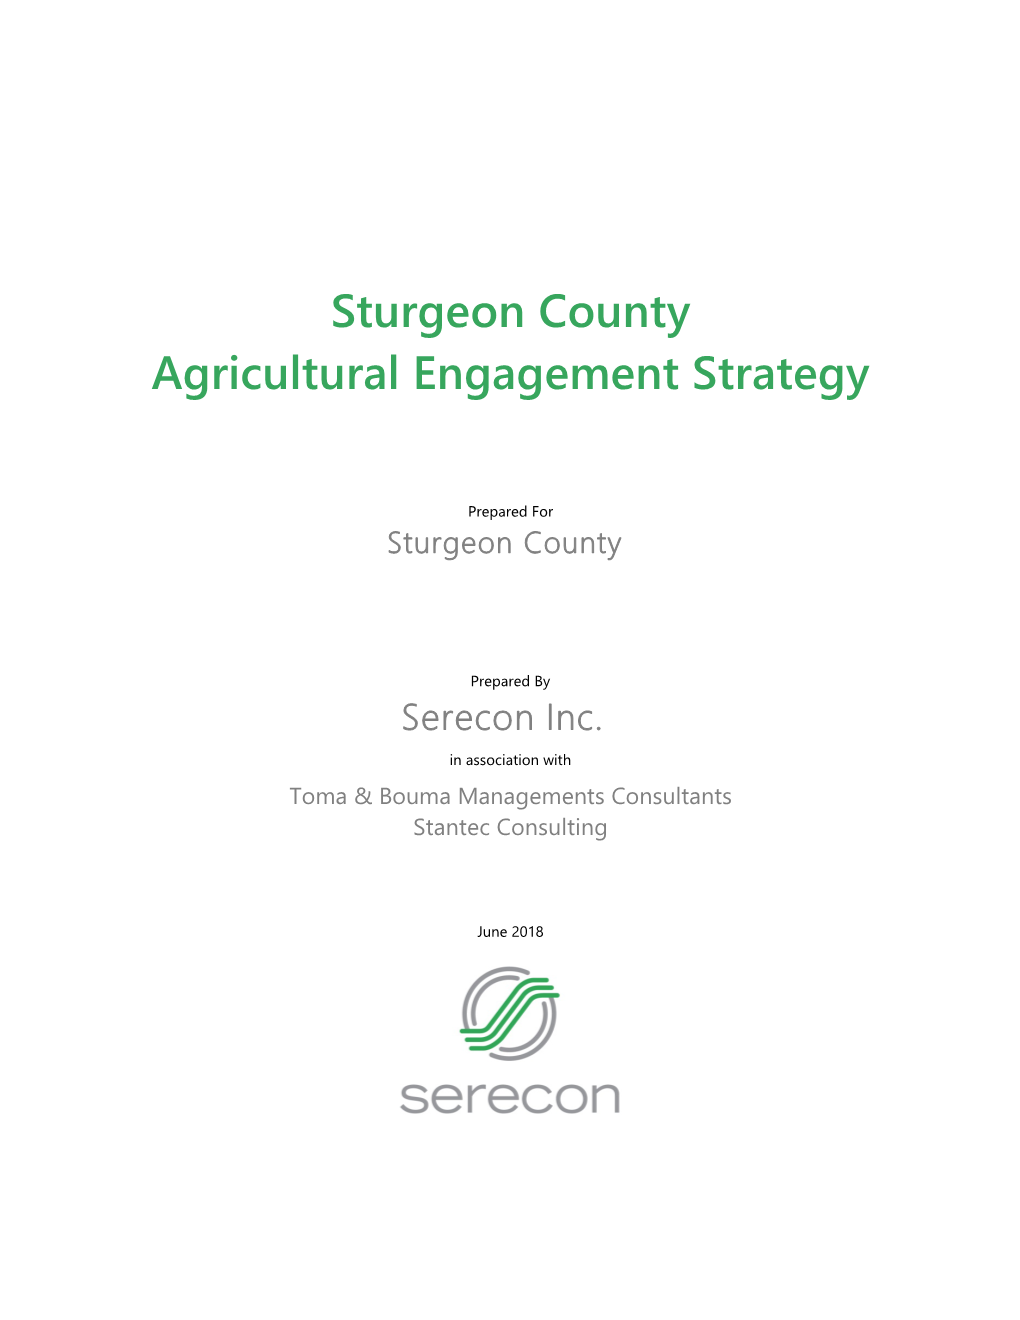 Sturgeon County Agricultural Engagement Strategy